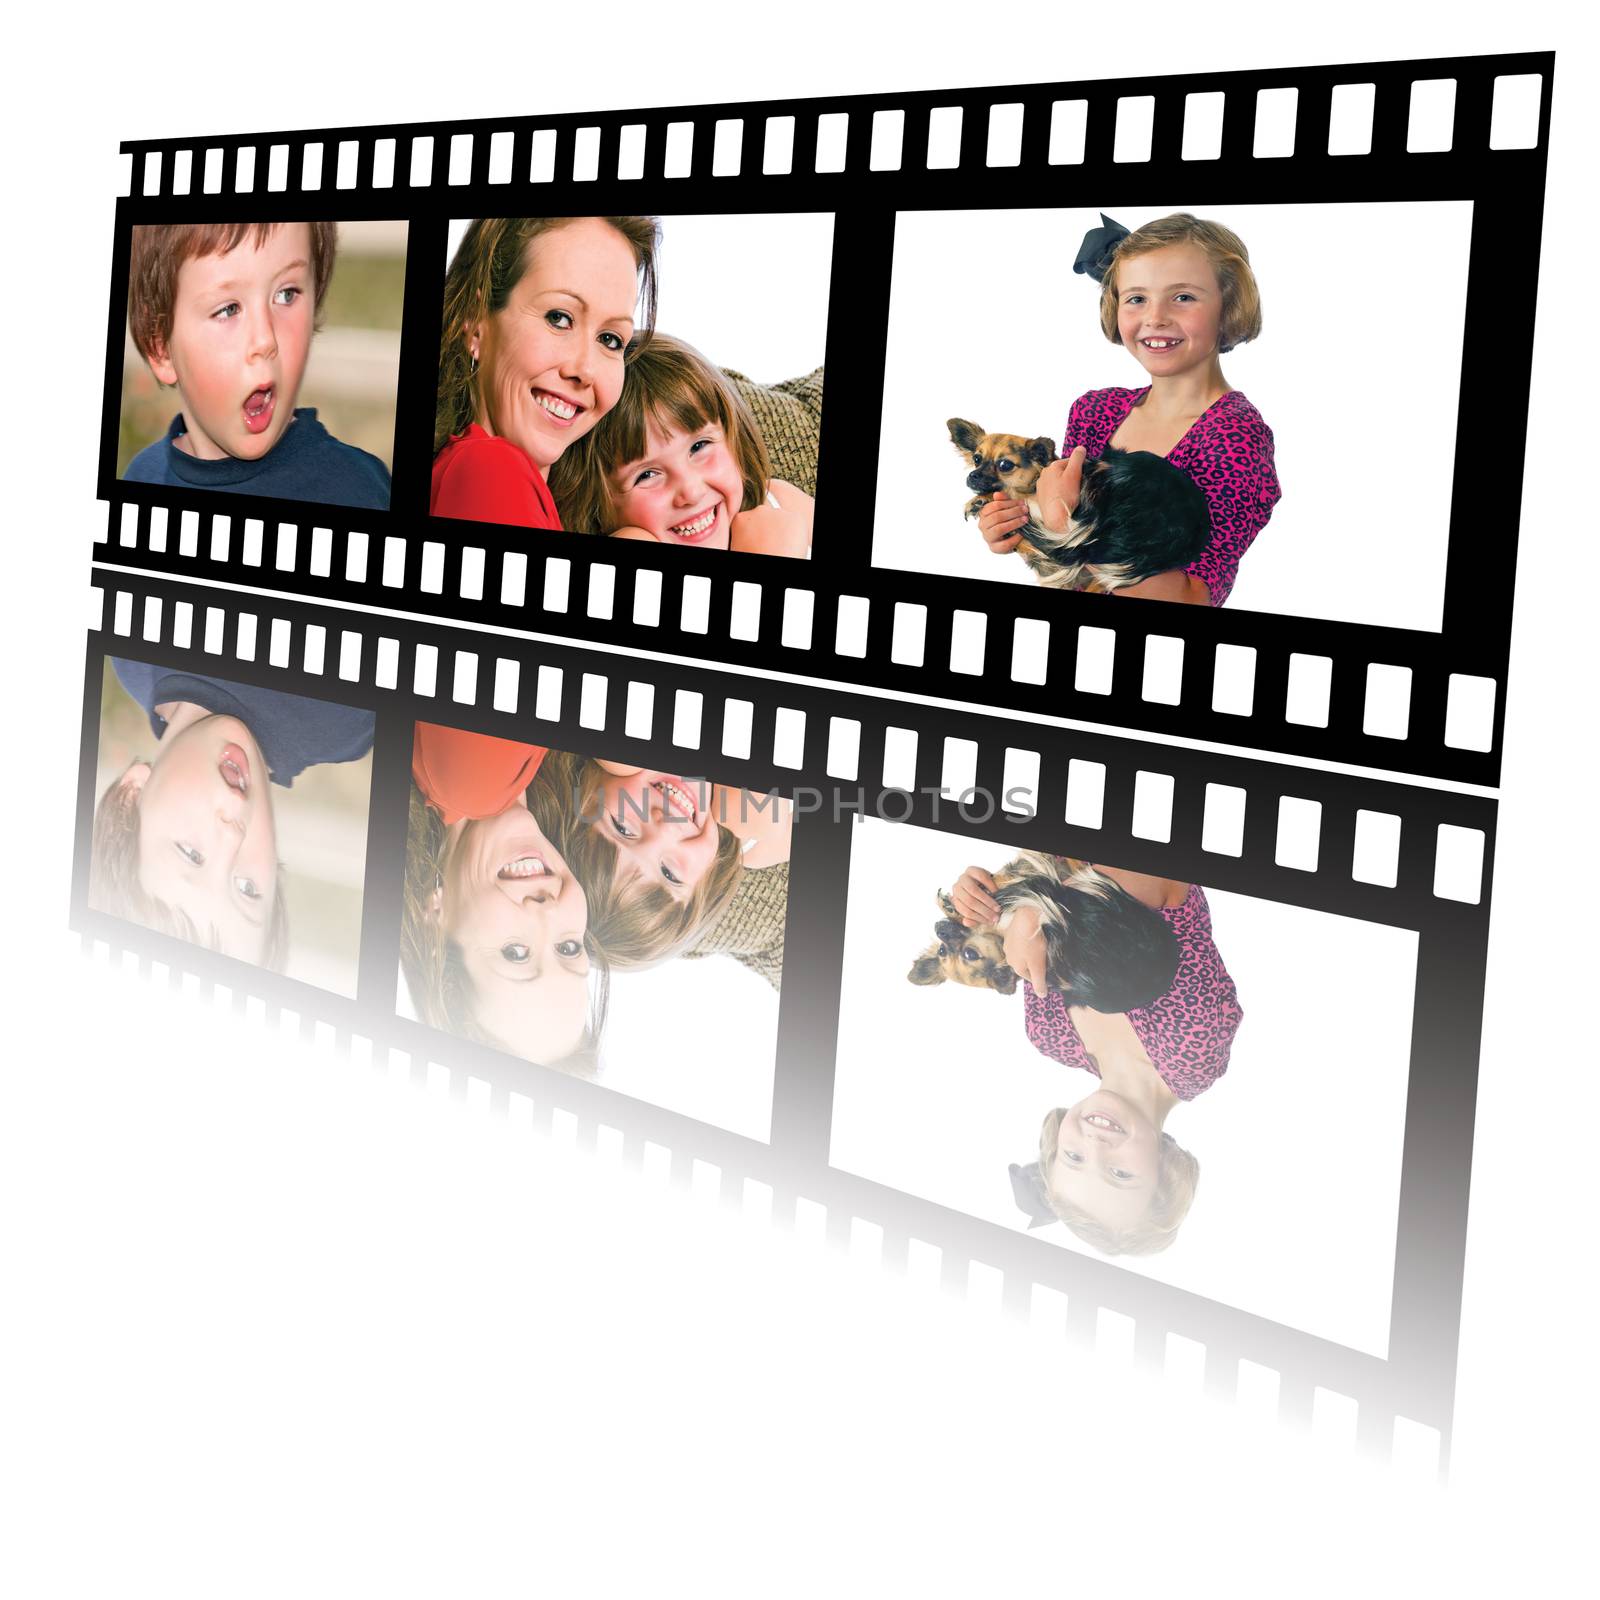 Reflective filmstrip of happy family by rcarner